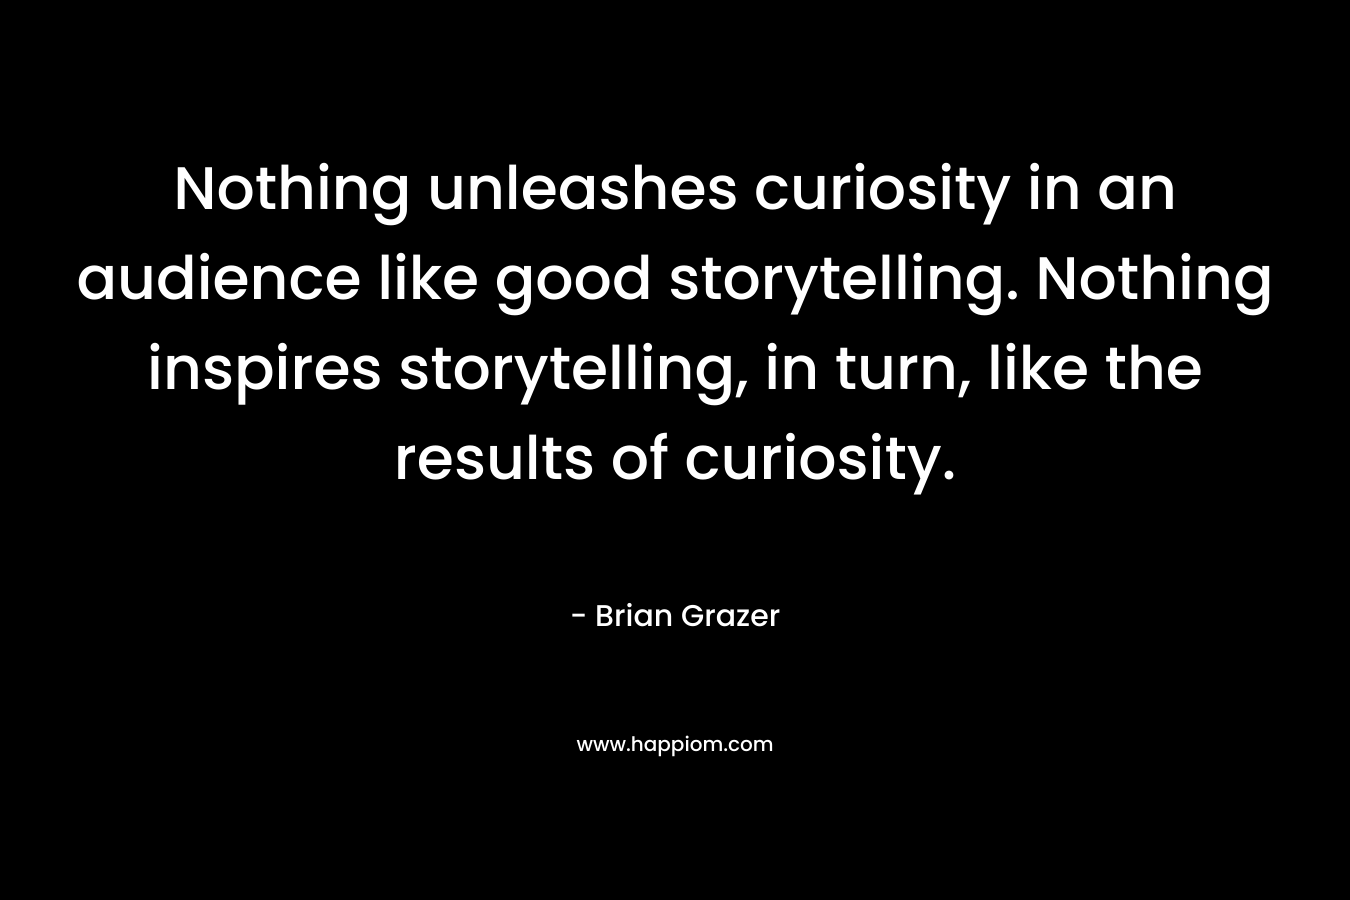 Nothing unleashes curiosity in an audience like good storytelling. Nothing inspires storytelling, in turn, like the results of curiosity. – Brian Grazer